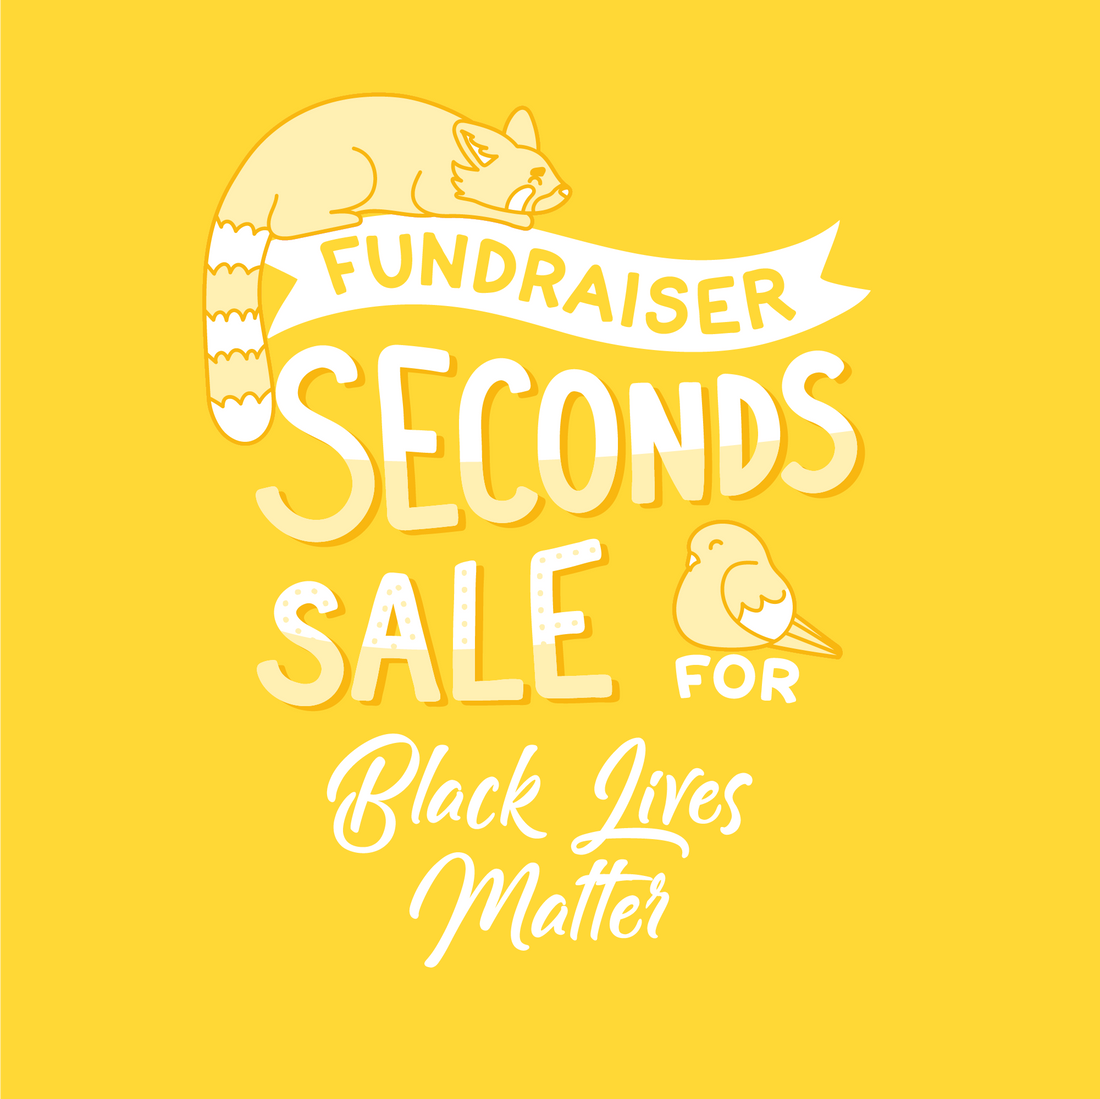 Charity Seconds Sale: February - Black Lives Matter